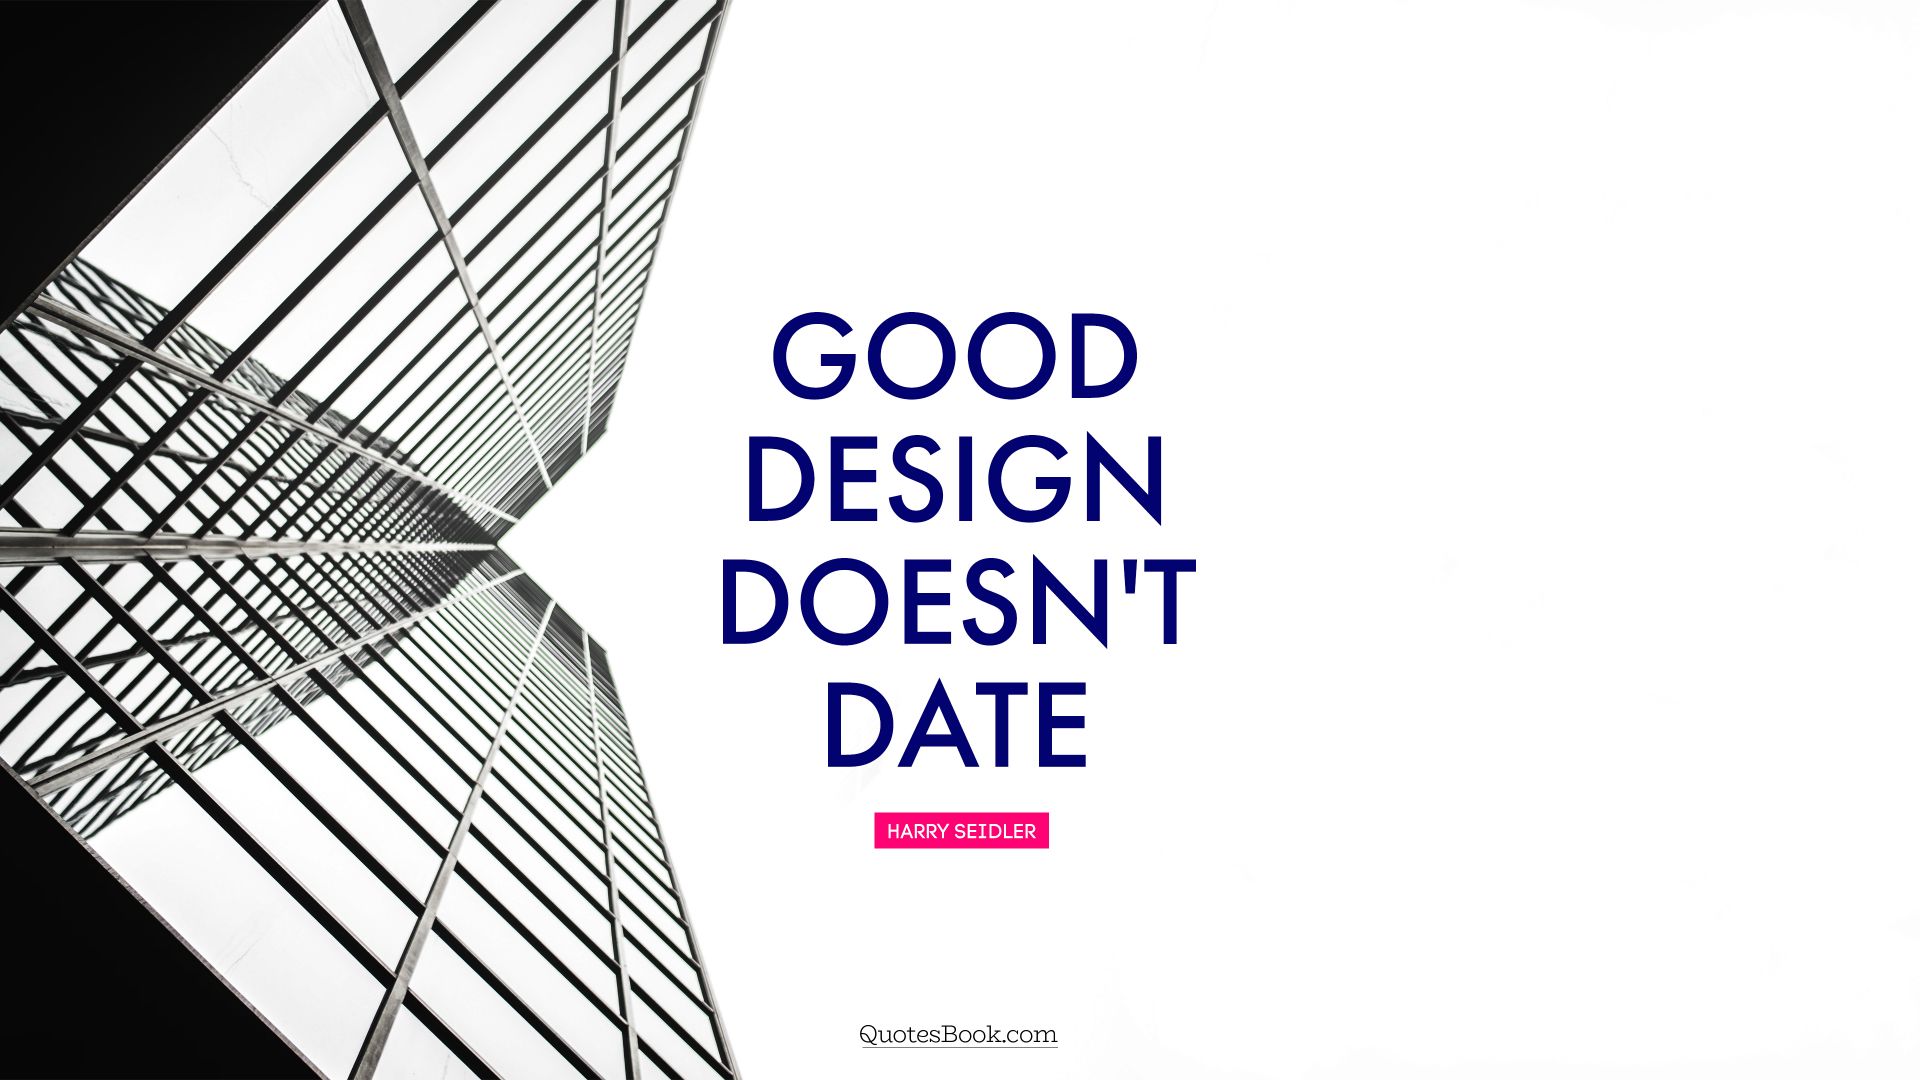 Good design doesn't date. - Quote by Harry Seidler